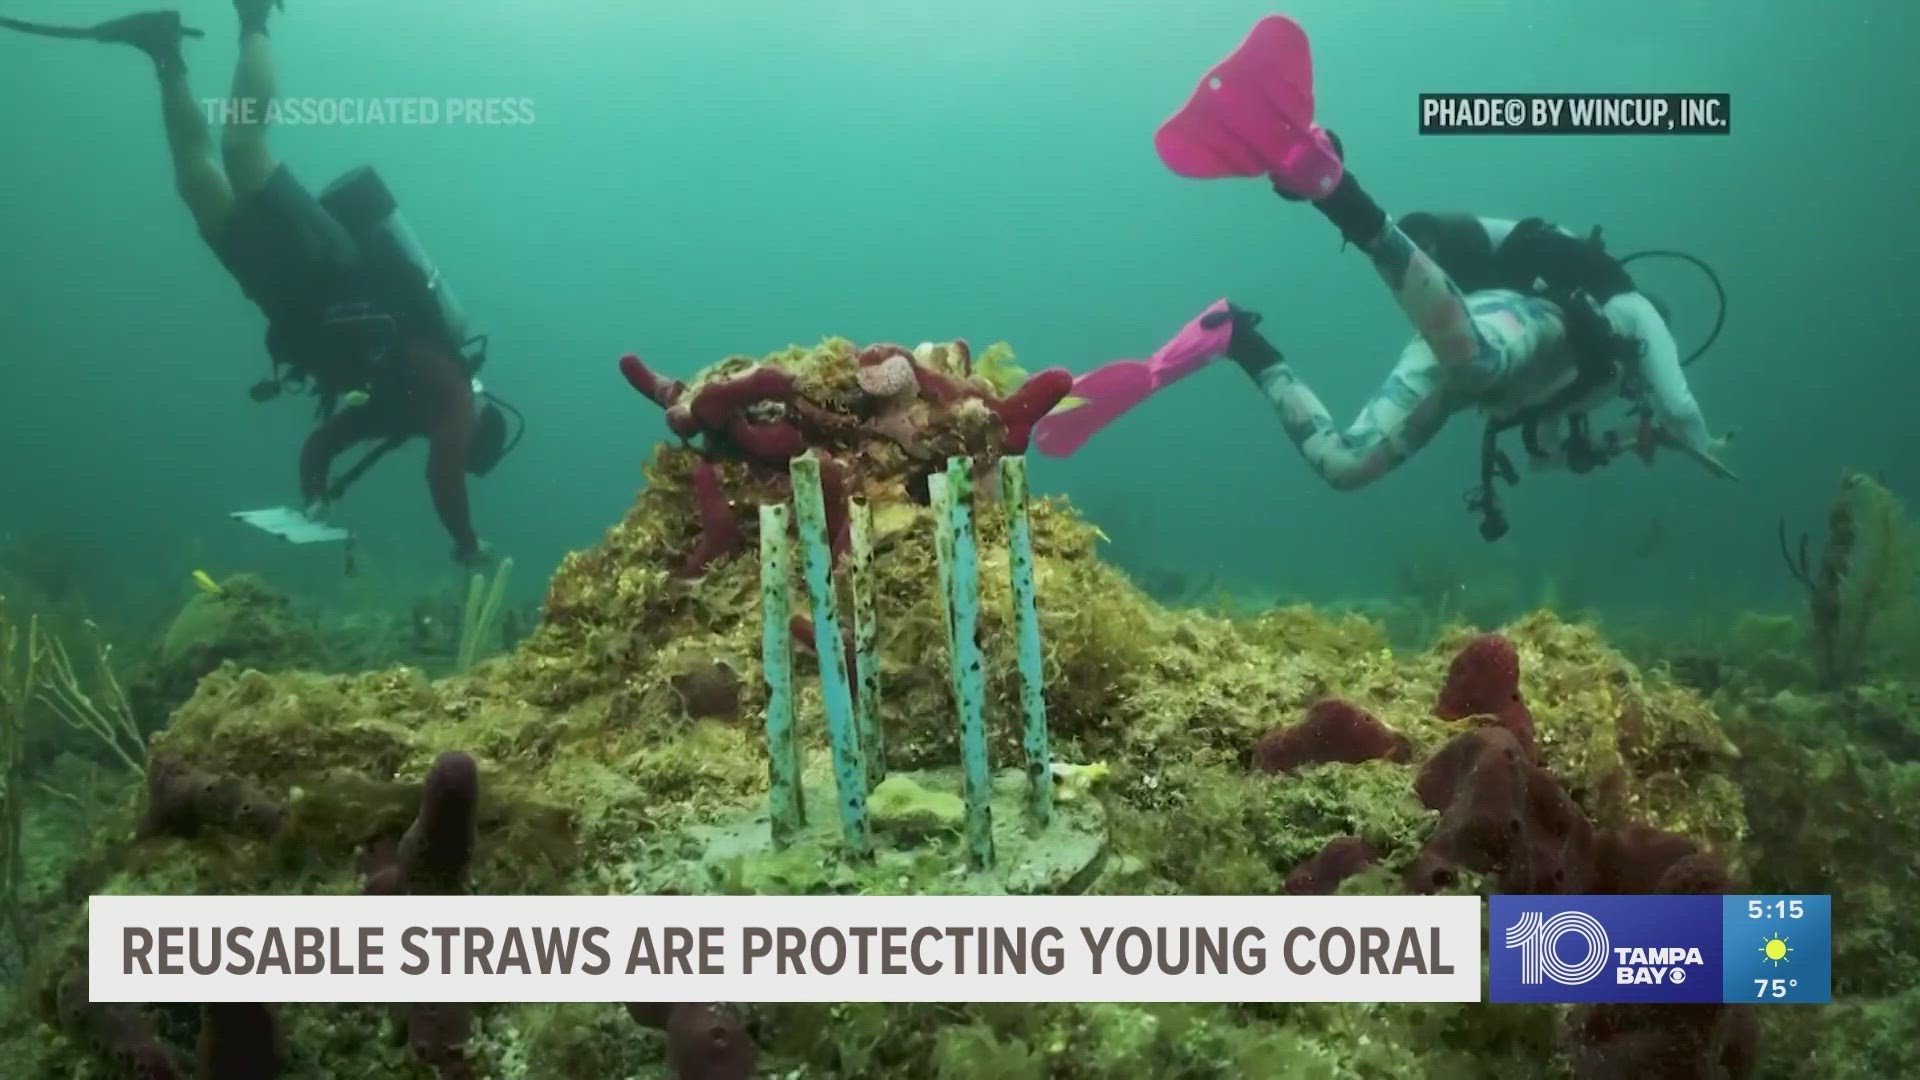 The straws are being used along the coast of South Florida and in the Florida Keys.